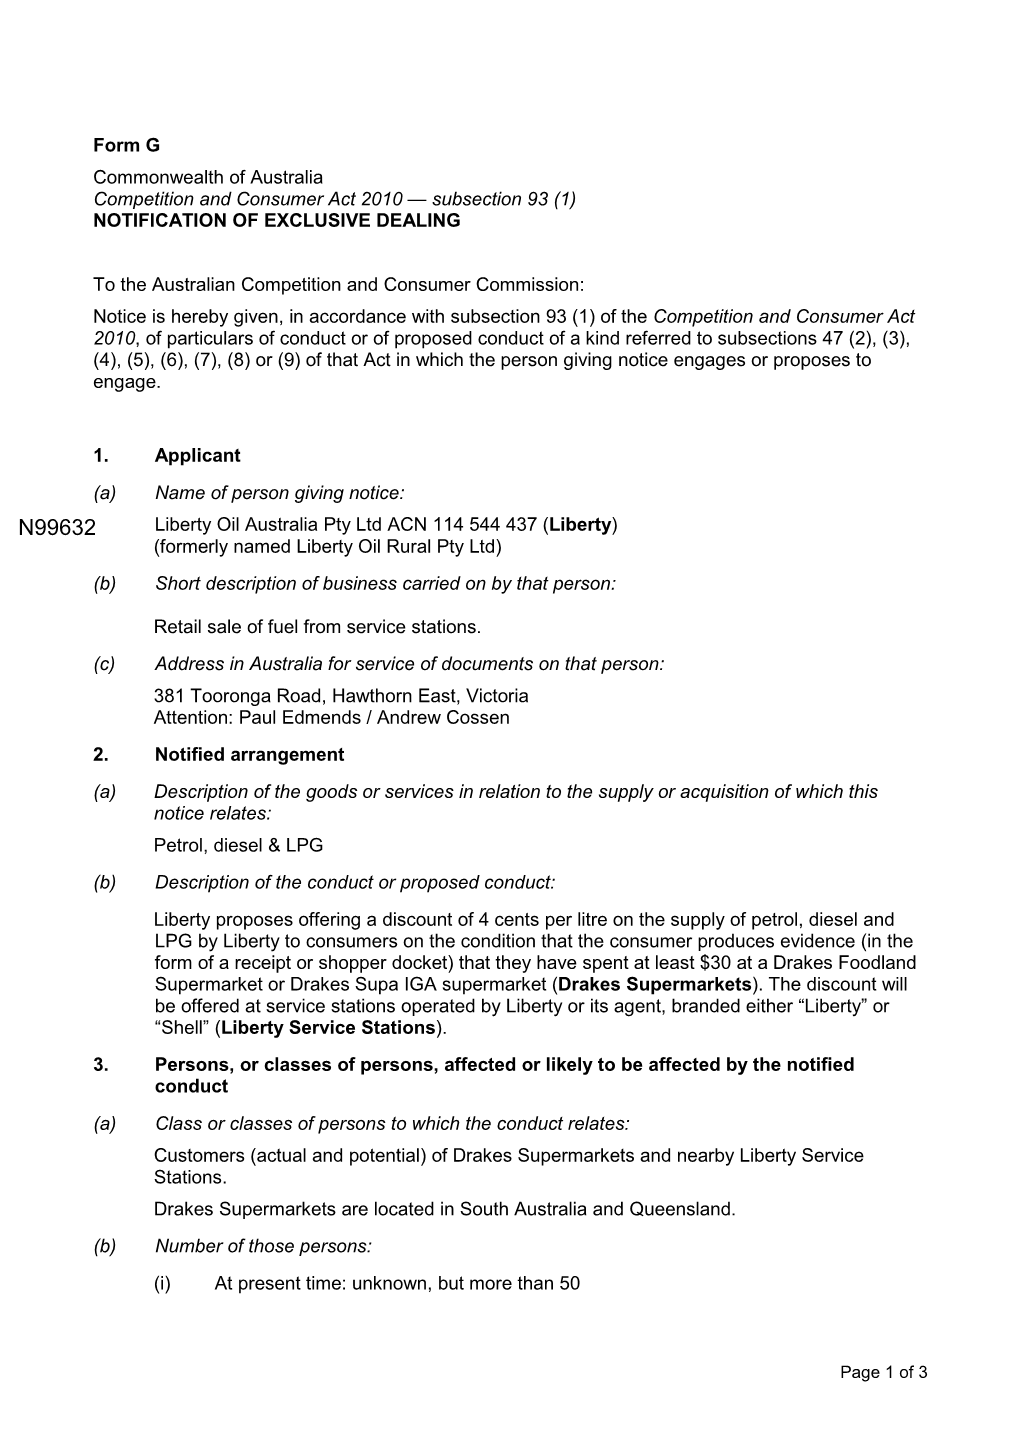 Form G Commonwealth of Australia Competition and Consumer Act 2010 — Subsection 93 (1) NOTIFICATION of EXCLUSIVE DEALING